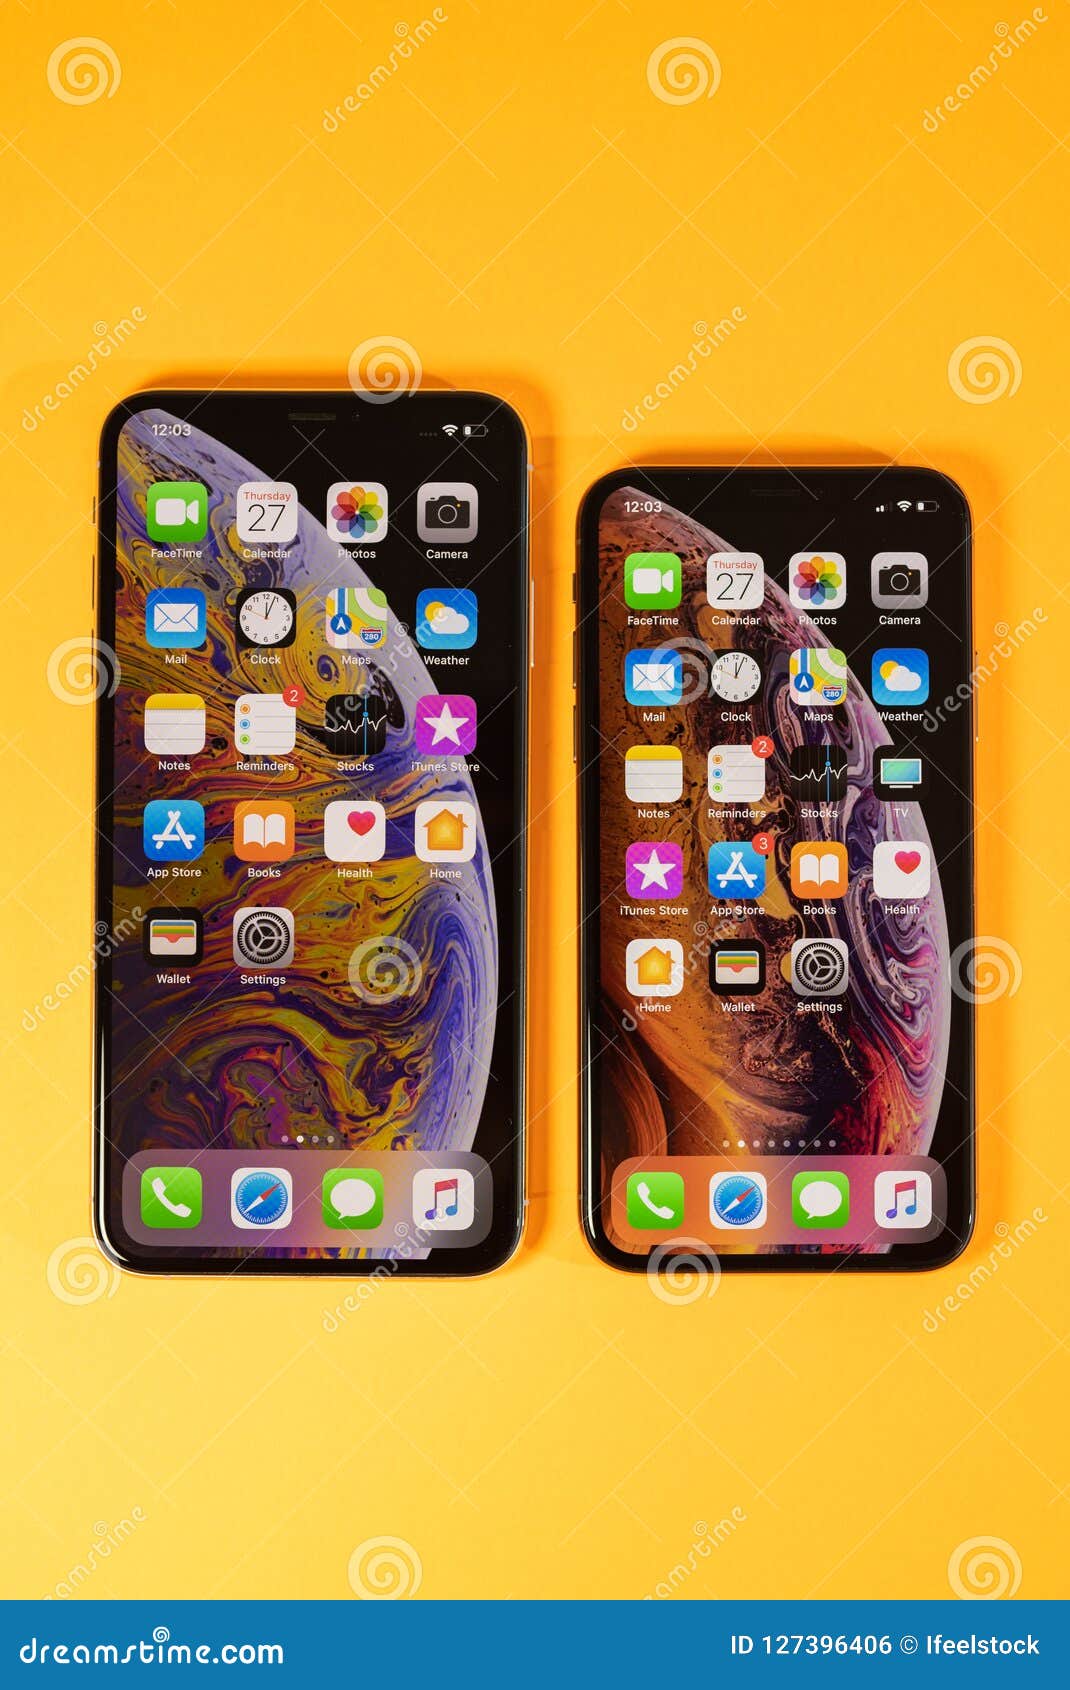 Apple IPhone  Xs  Max  Against IOS  12 Vibrant Background  